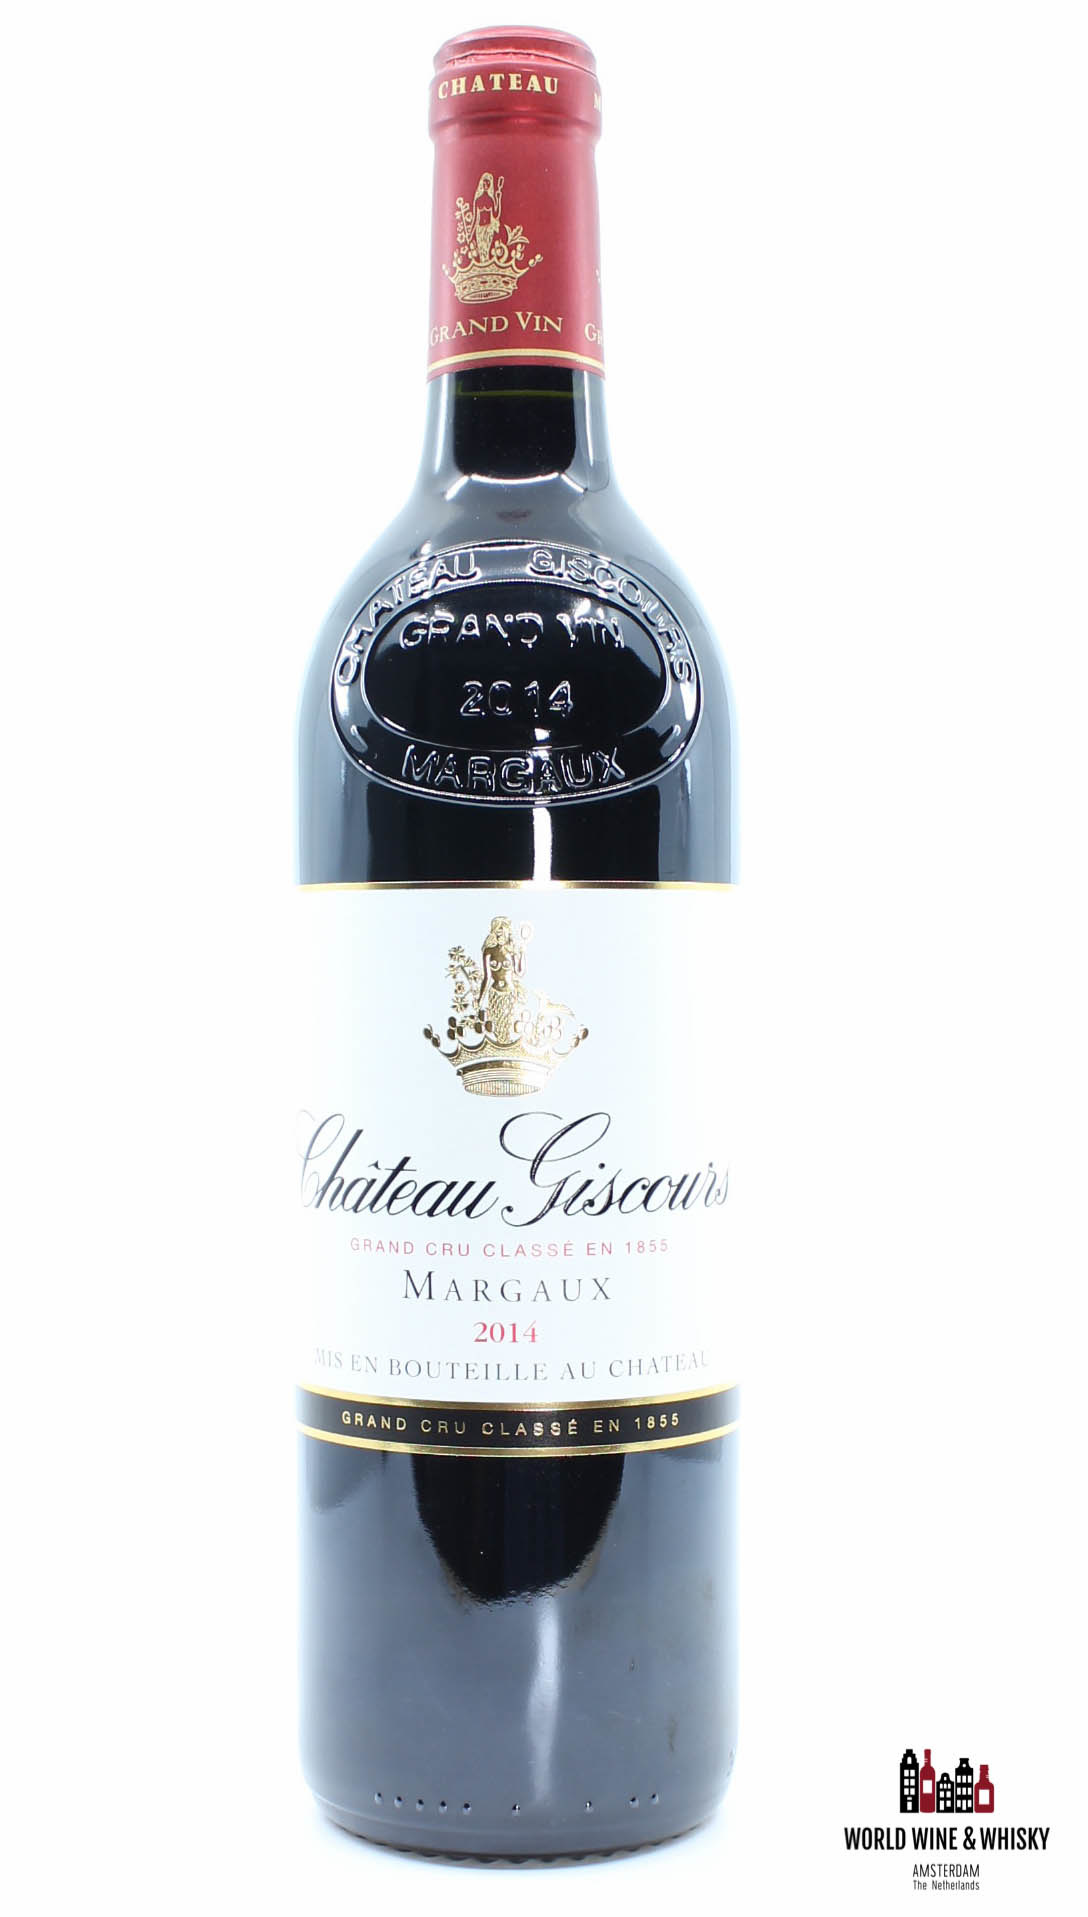 Chateau Giscours Chateau Giscours 2014 (in OWC)